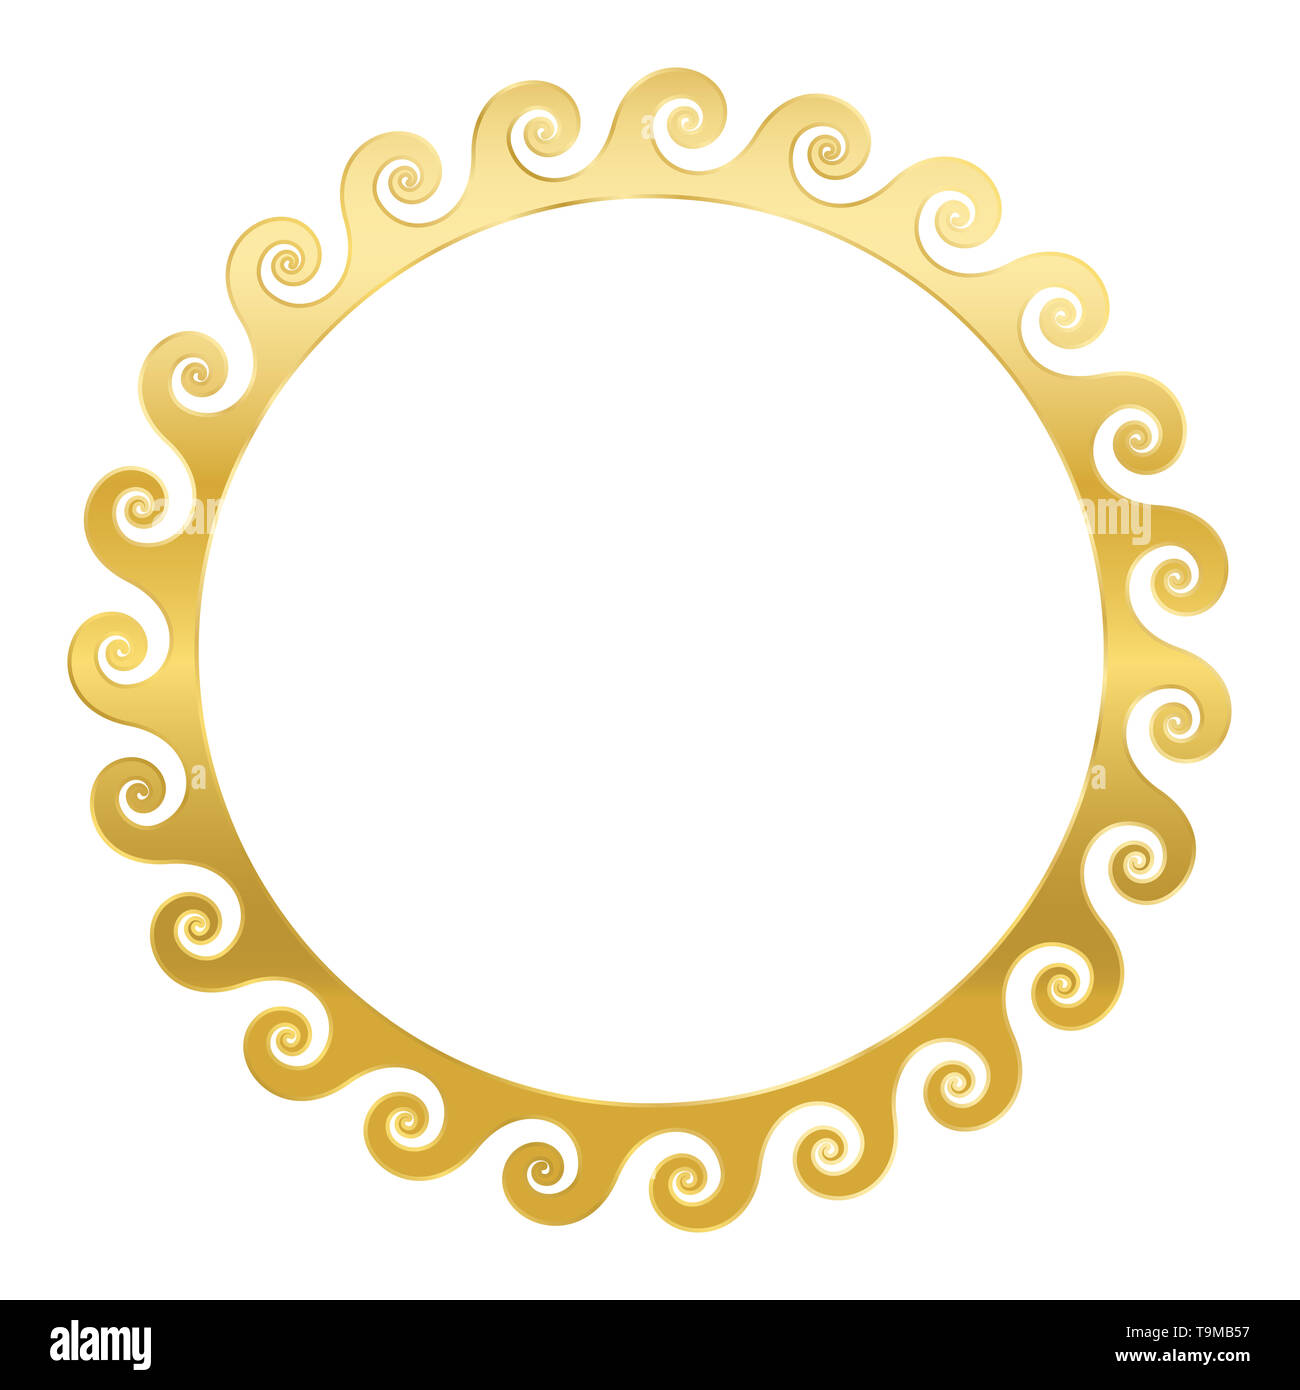 Golden spirals frame. Seamless meander pattern design. Waves shaped into repeated motif. Scroll pattern. Decorative border. Vitruvian wave. Stock Photo